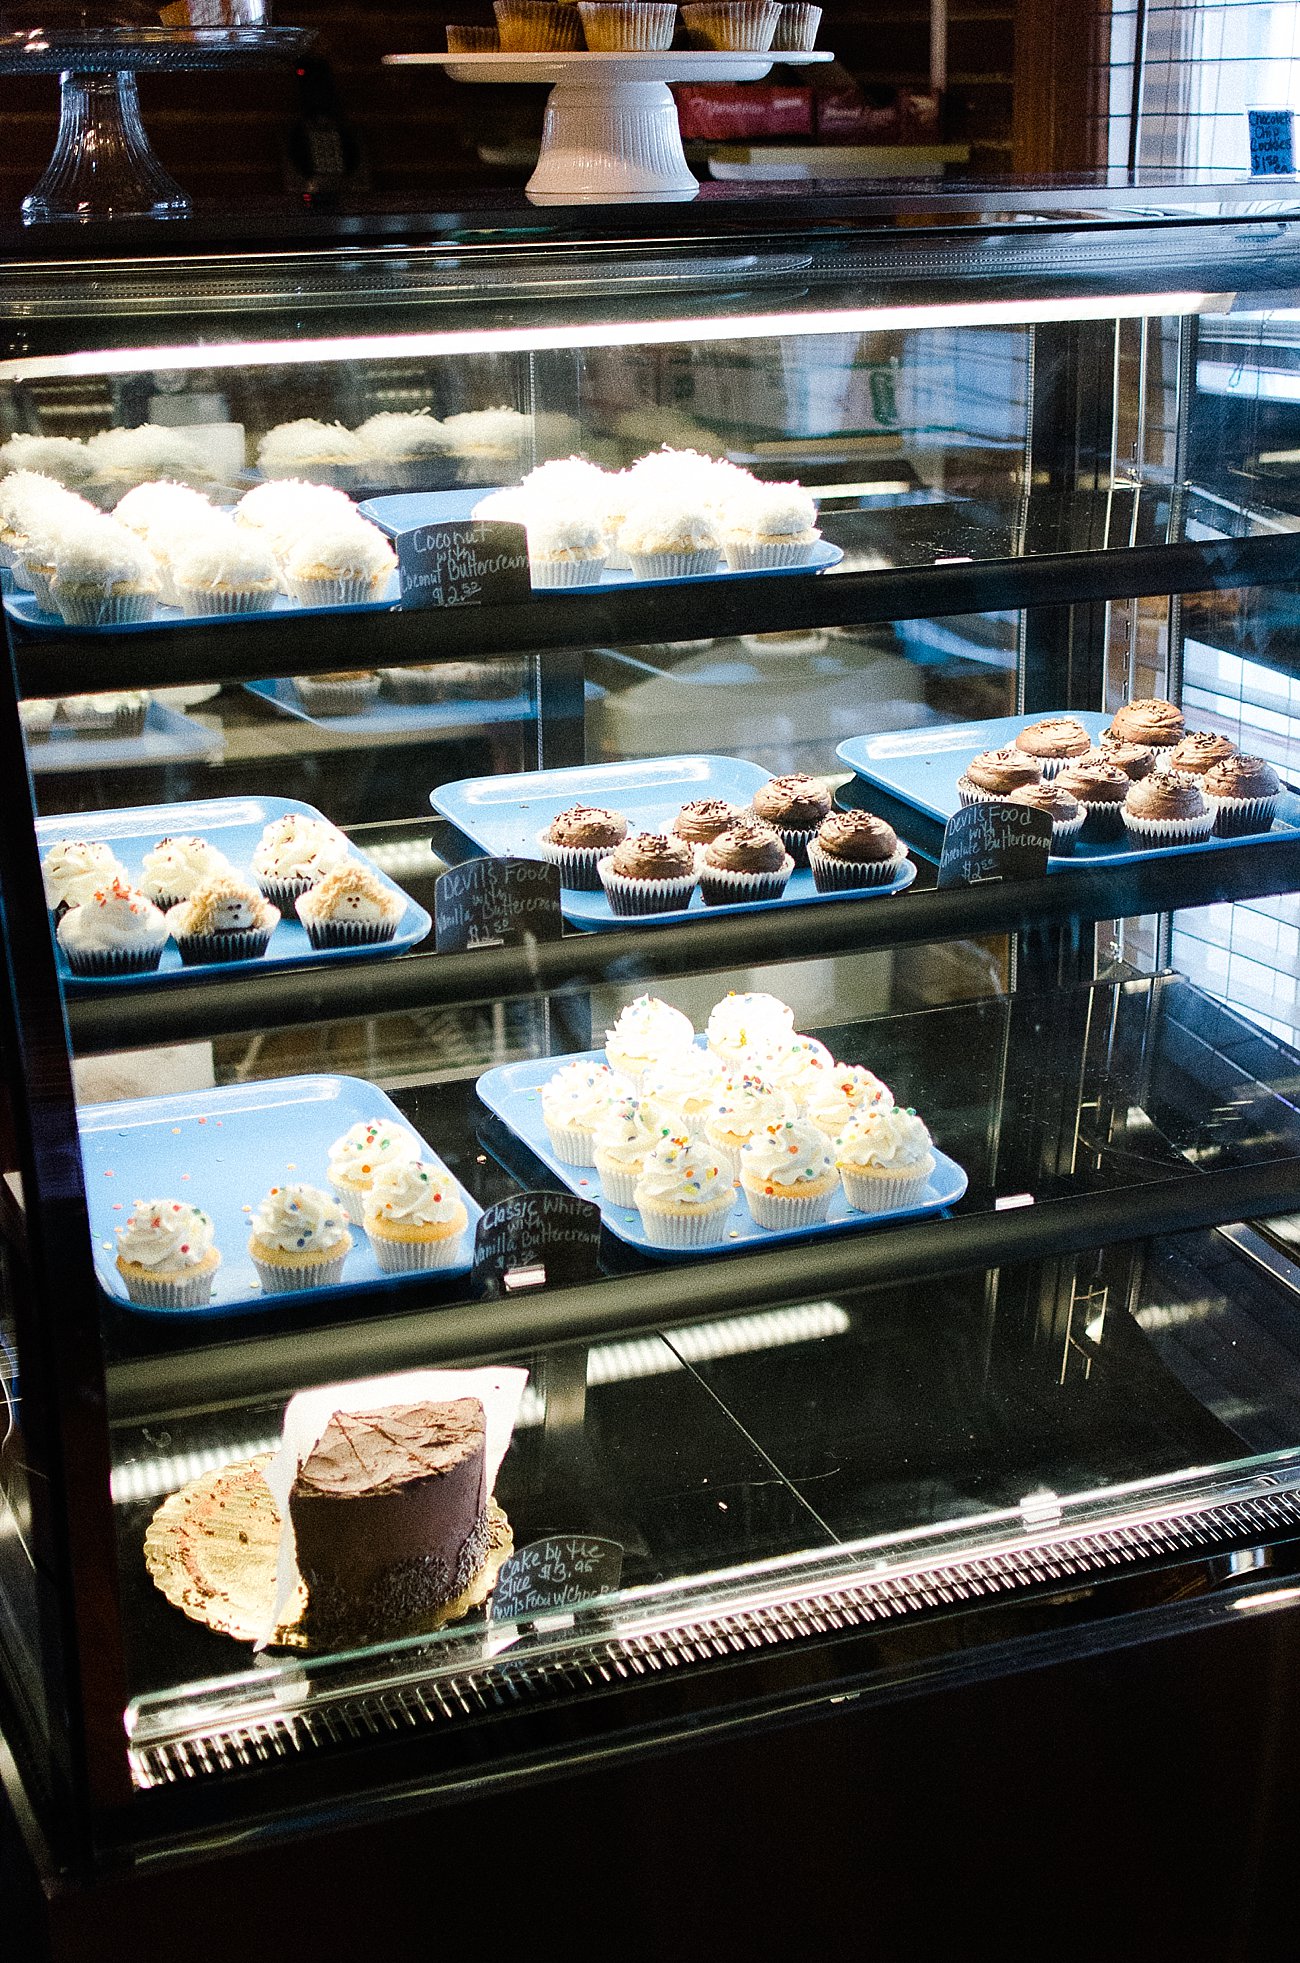 Cakes by By's Blue House Bakery and Coffee Shop in Jamestown, North Carolina (11)